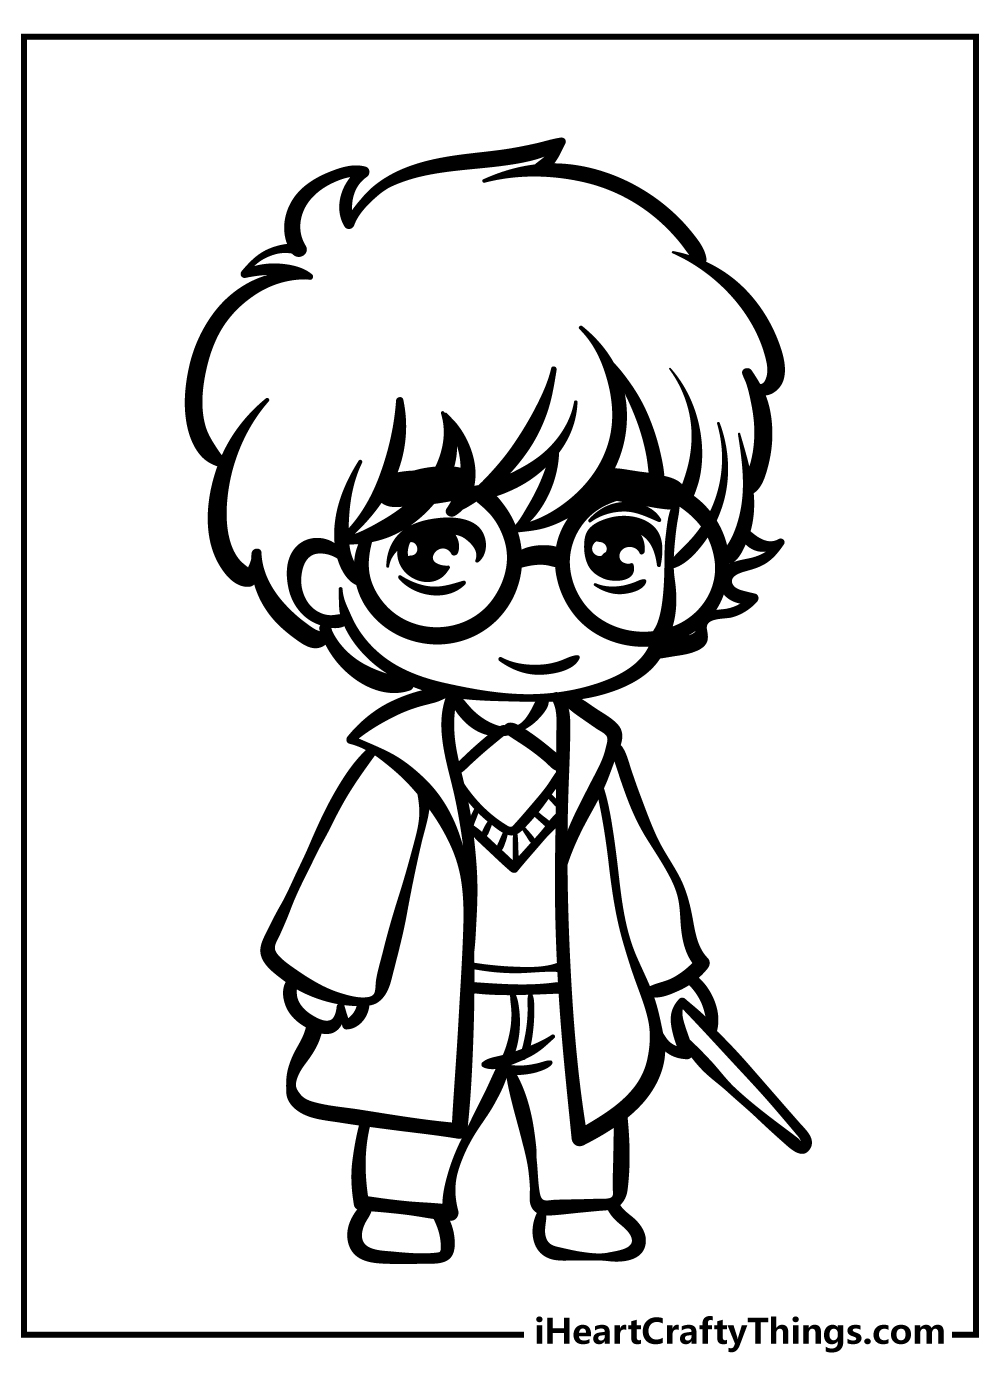 Harry potter coloring pages free printables